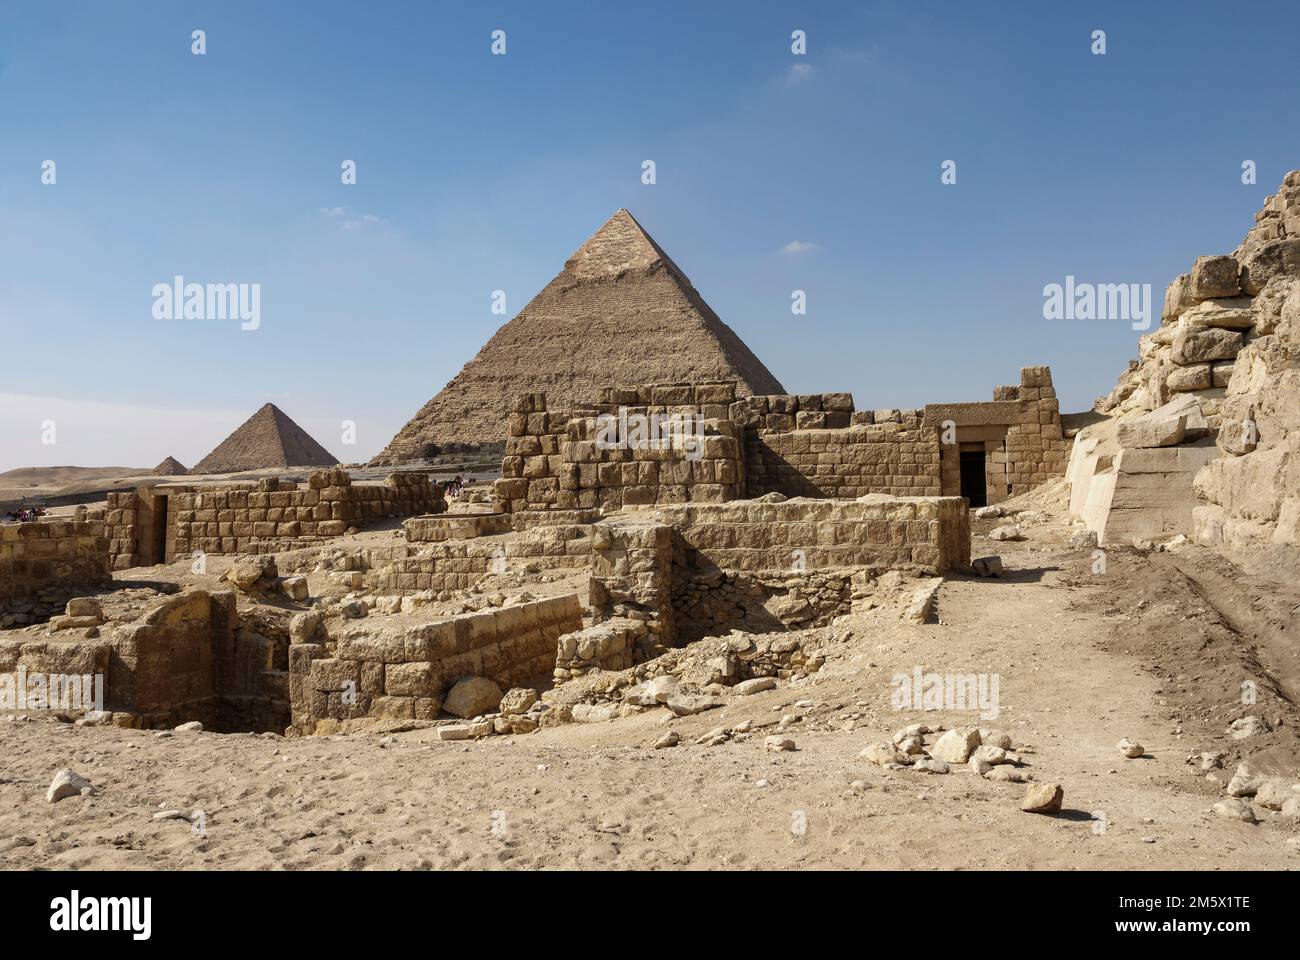 View of Khafre Pyramid at the Giza Pyramids and Sphinx, Cairo, Egypt Stock Photo